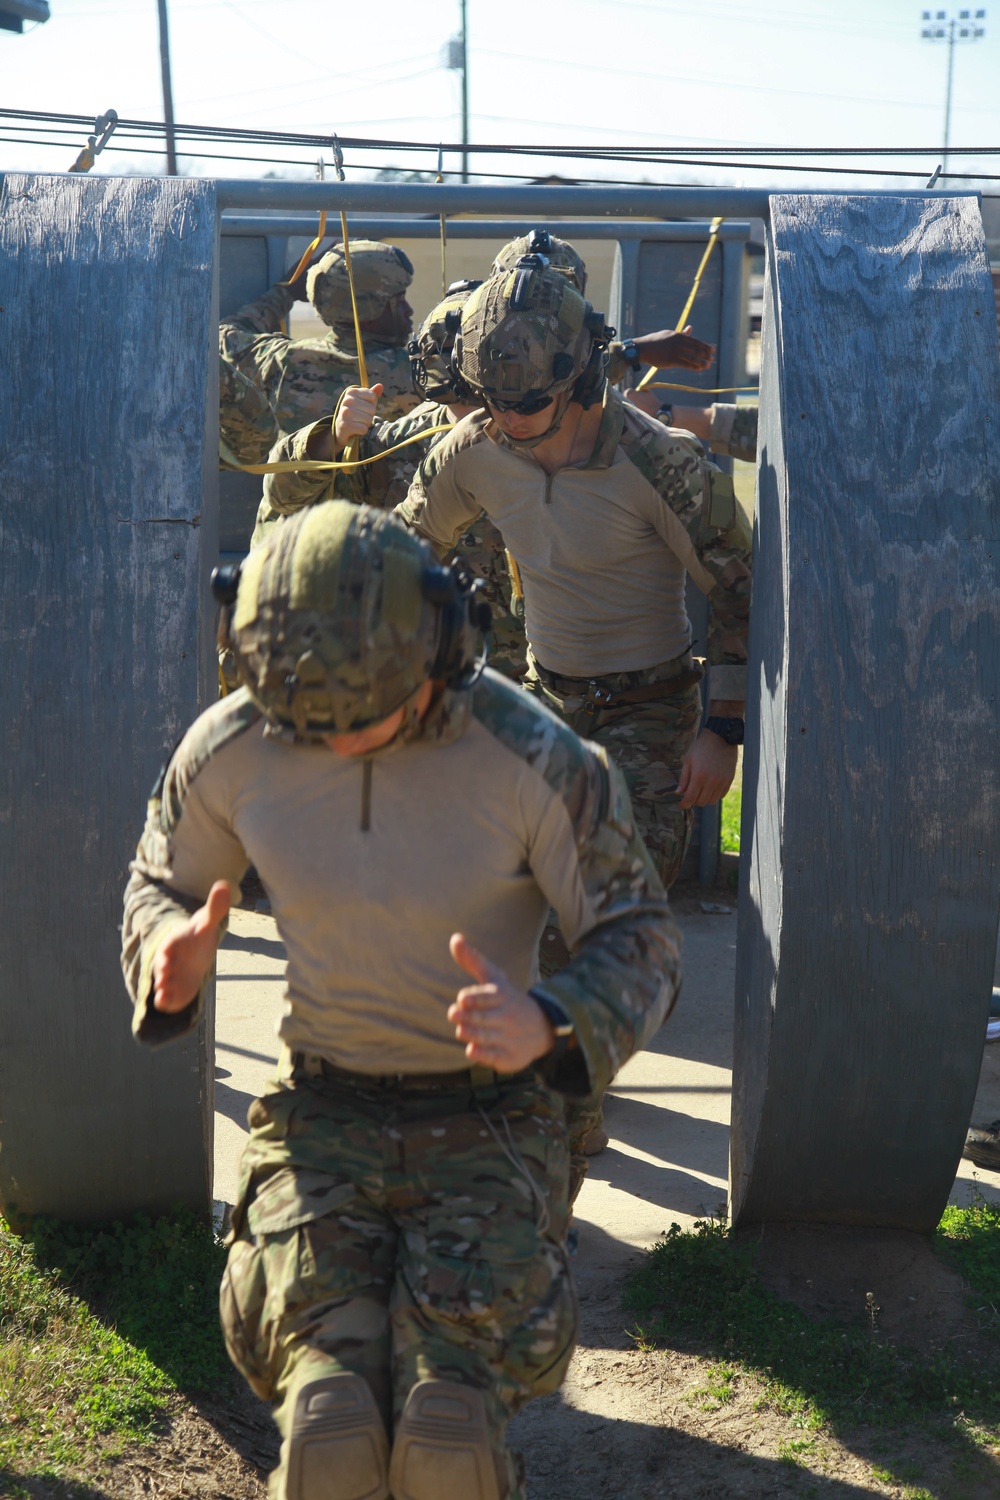 Army Rangers: sustained airborne training